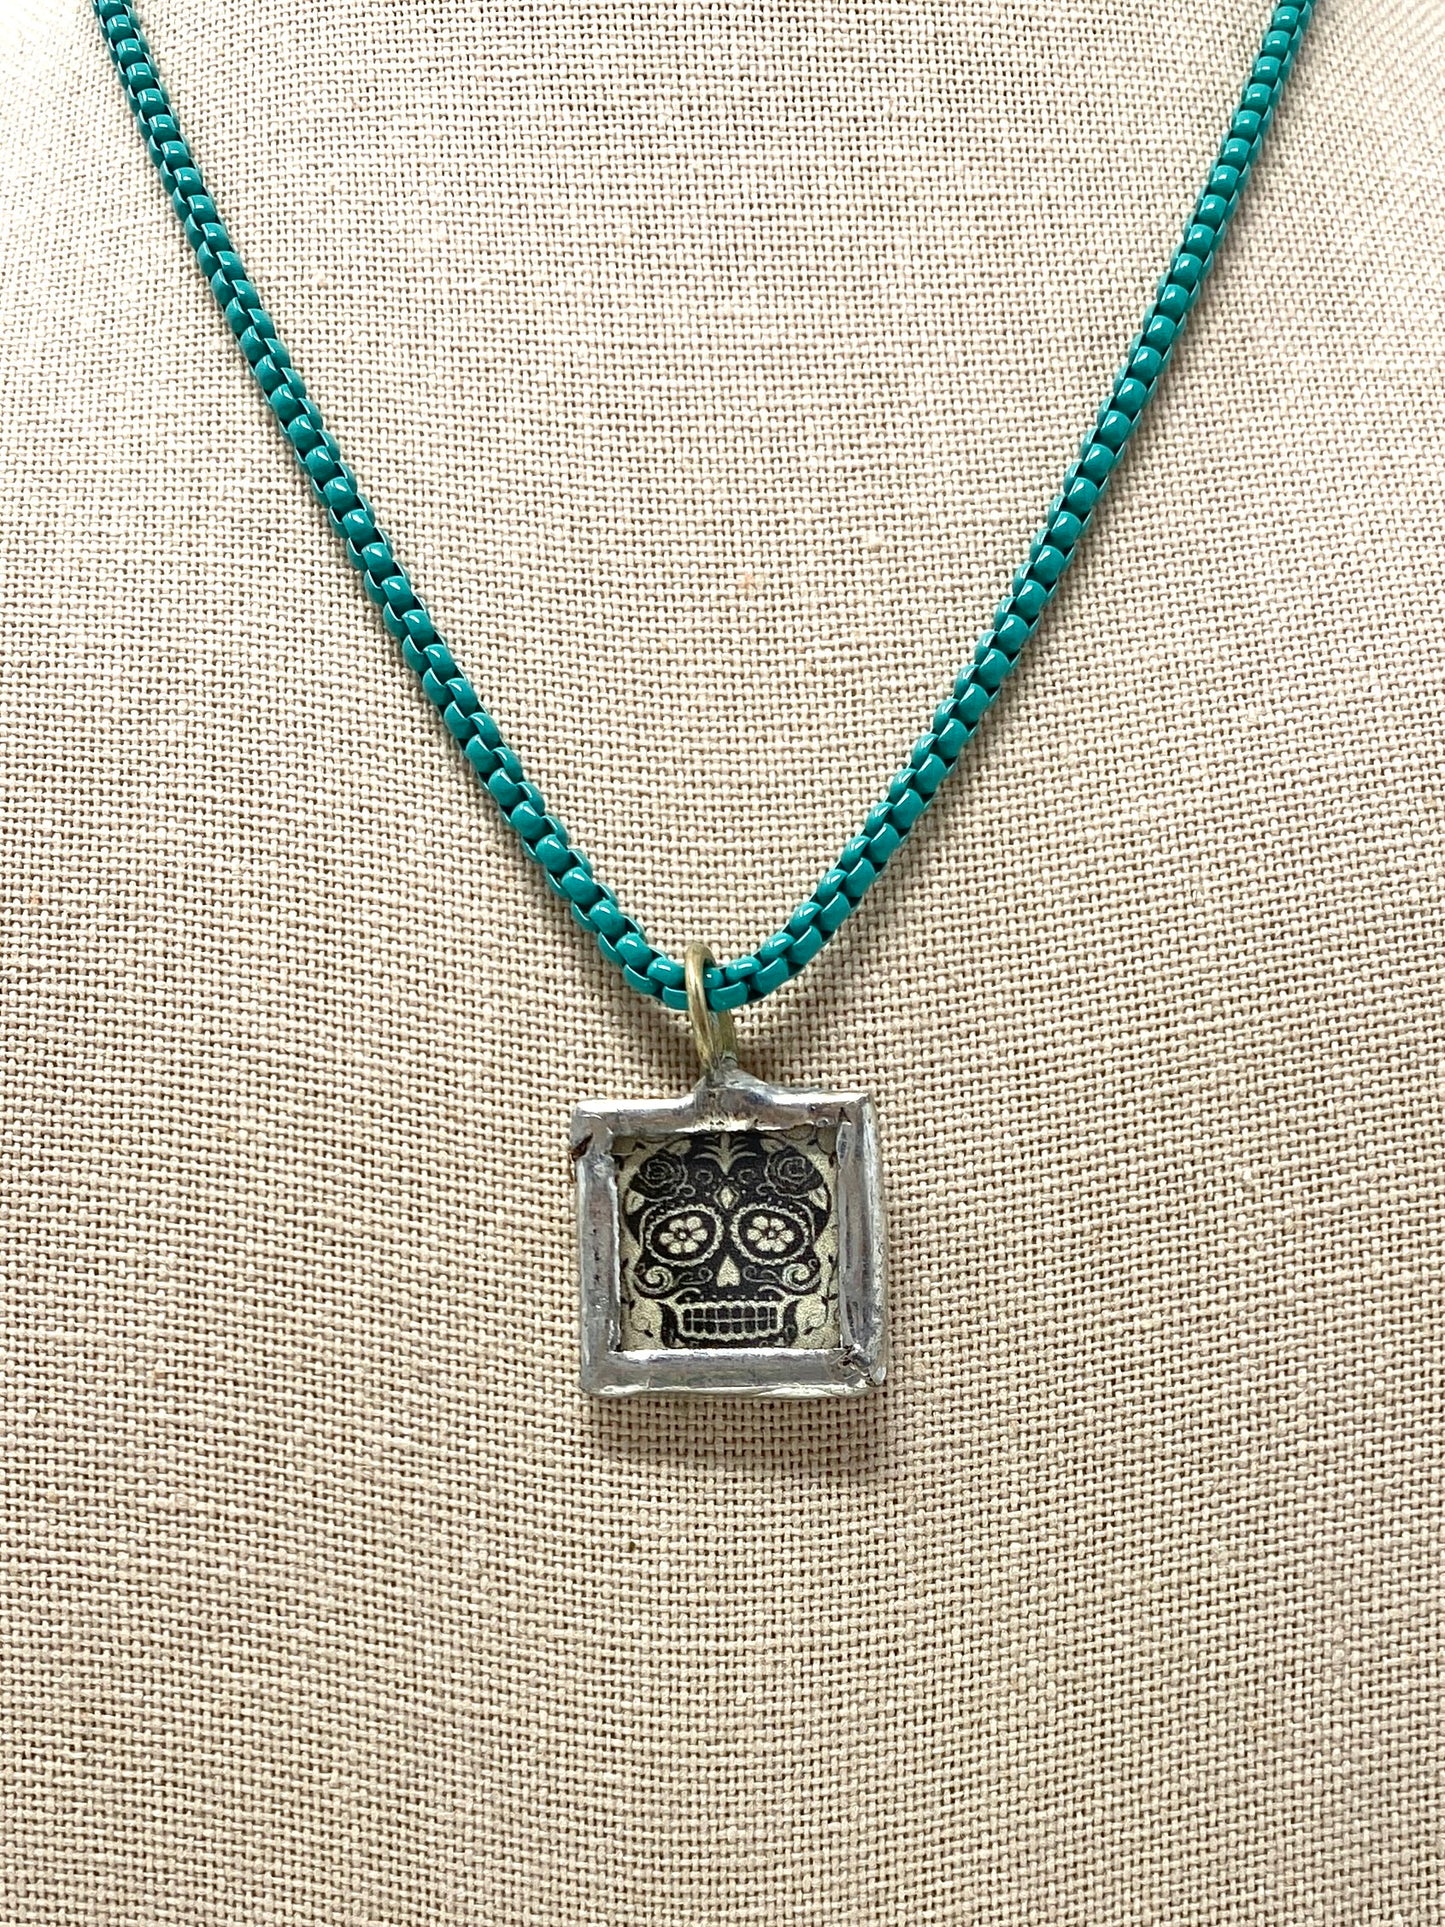 Green Turquoise Enamel Box Chain Necklace With Soldered Sugar Skull Square Pendant